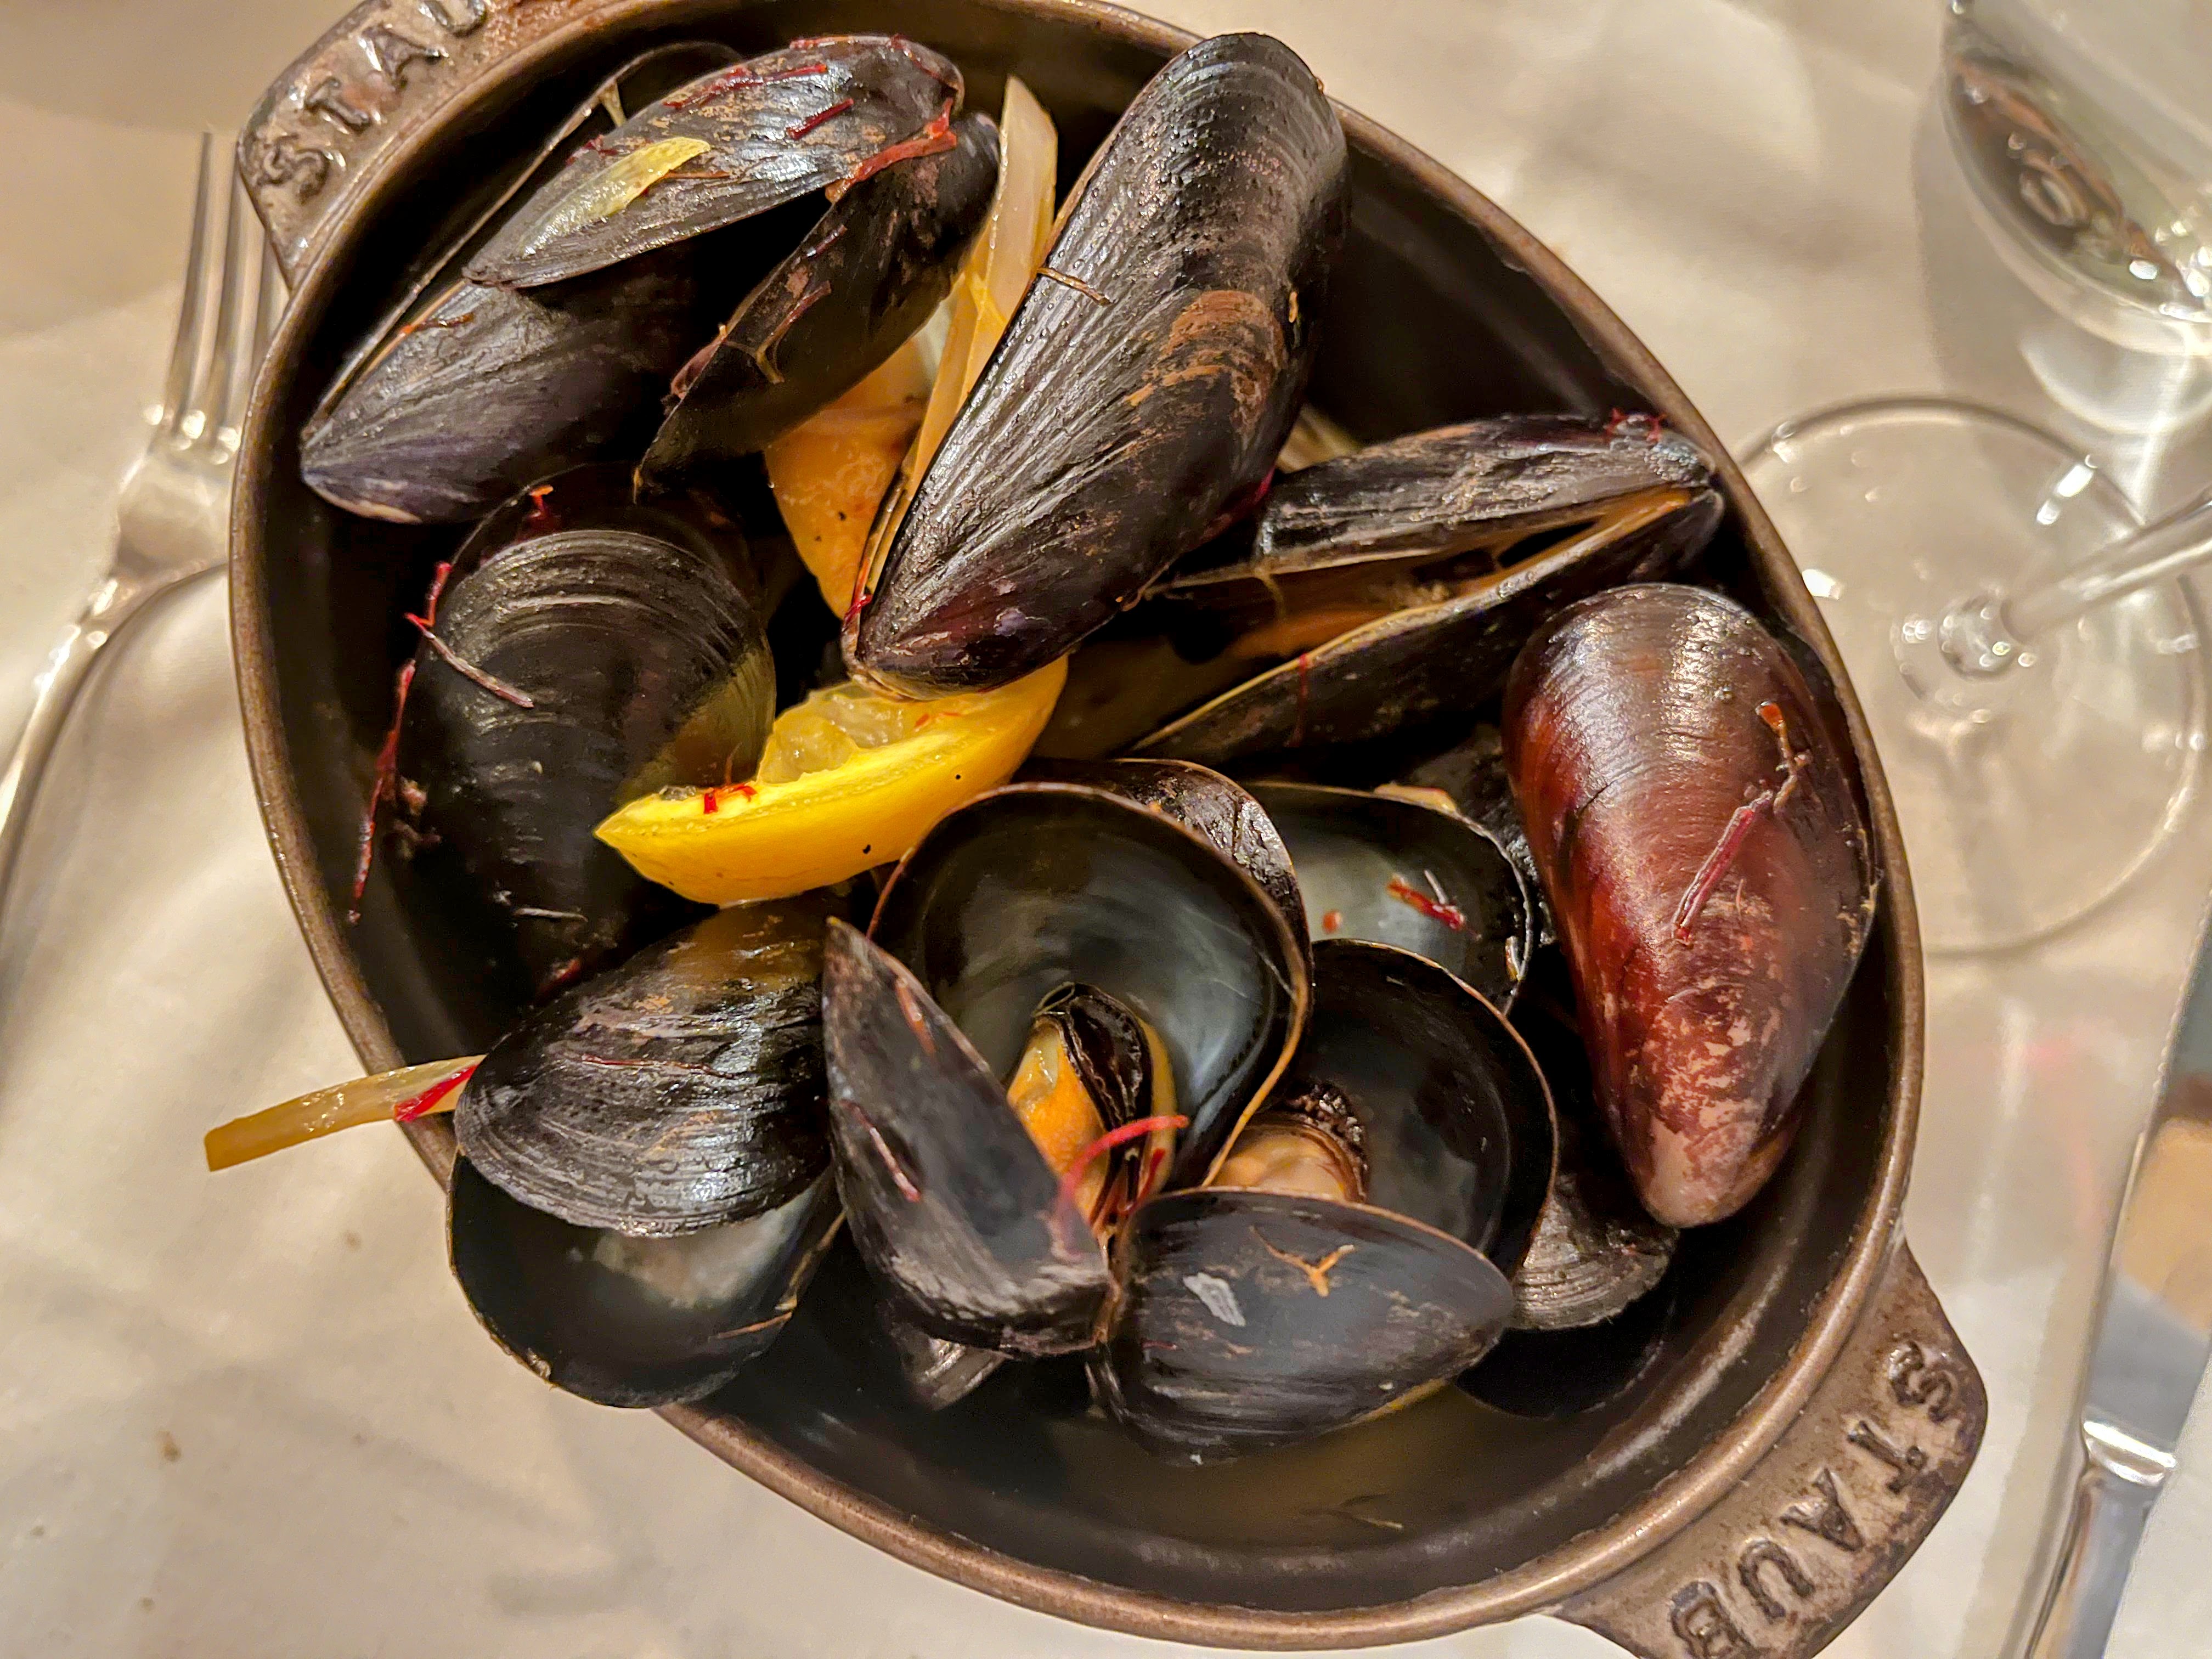 An overhead shot of a mini Staub dutch oven filled with cooked mussels.